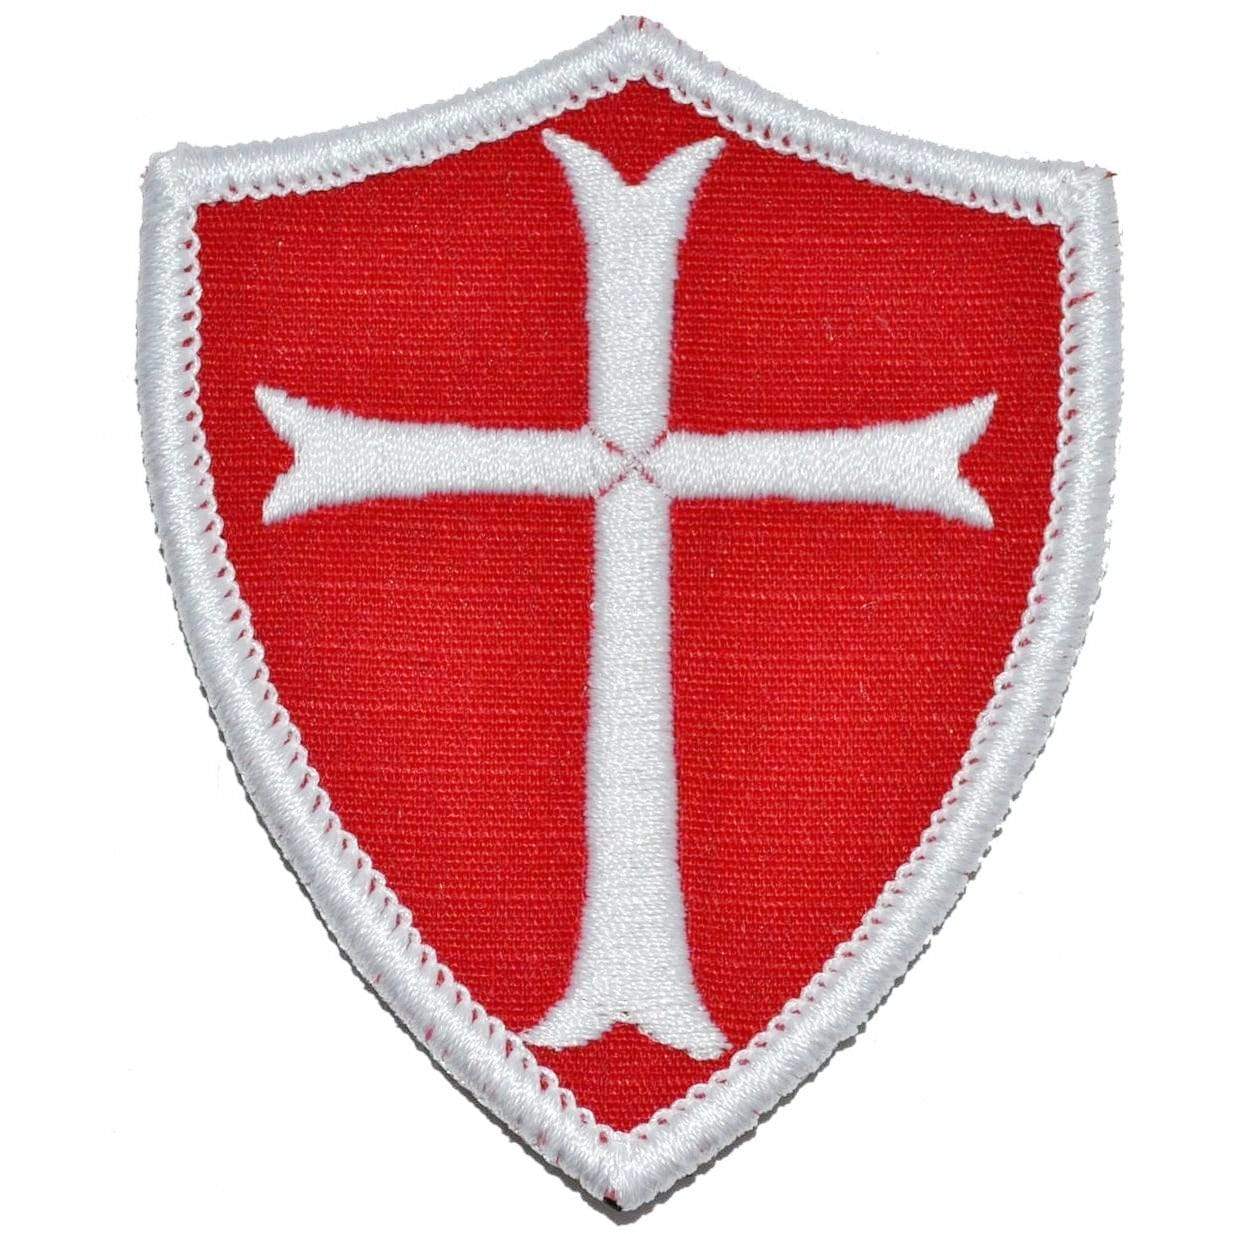 Tactical Gear Junkie Patches Red Knights Templar - 2.5x3 Shield Patch